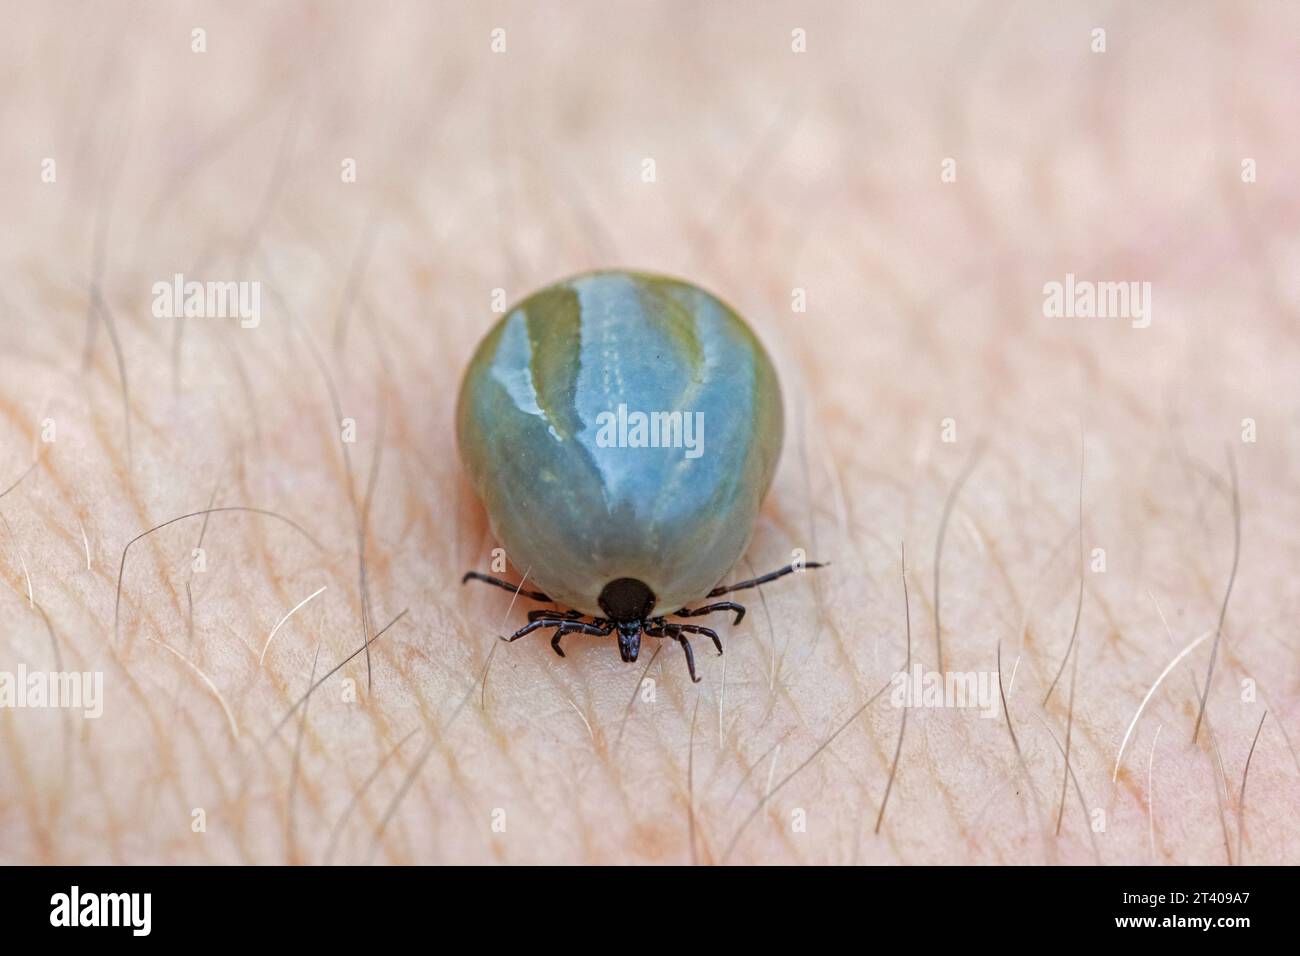 Castor bean tick (Ixodes ricinus) female engorged with blood on human skin can cause Lyme disease and tick-borne encephalitis Stock Photo